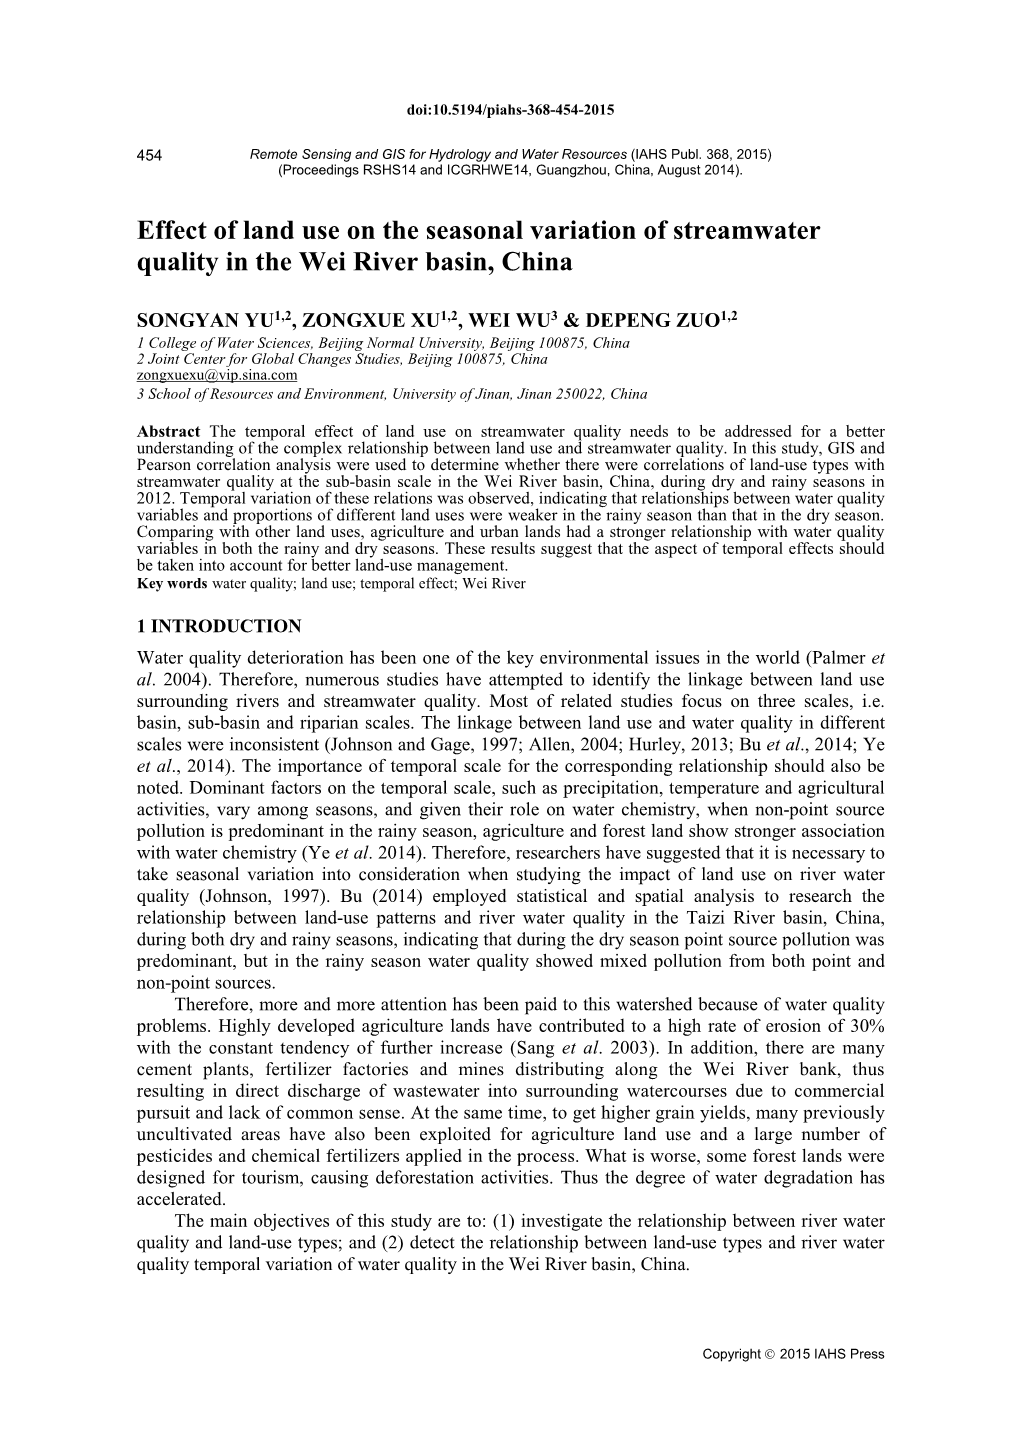 Effect of Land Use on the Seasonal Variation of Streamwater Quality in the Wei River Basin, China